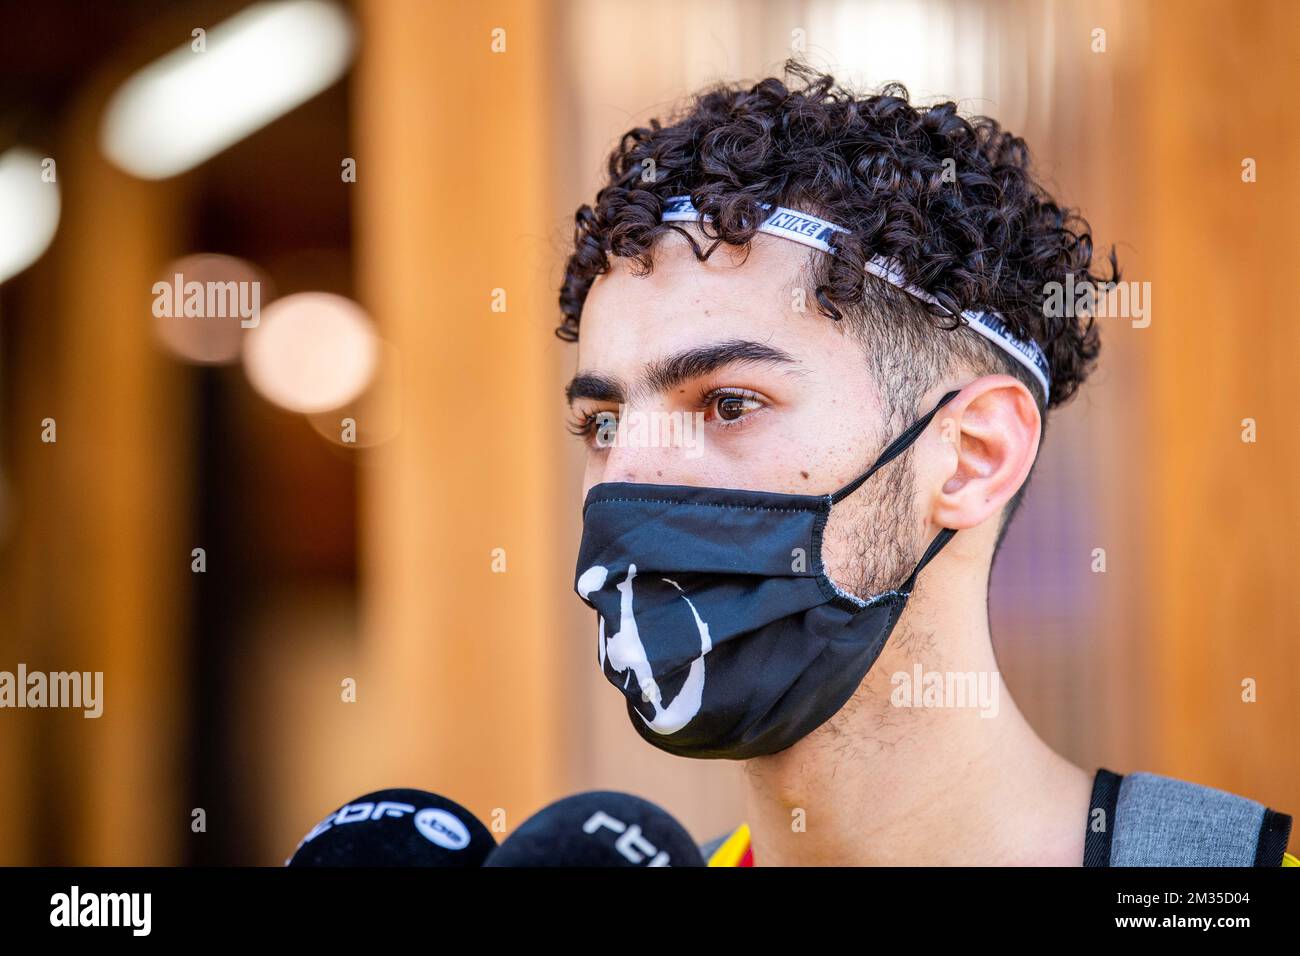 taekwondo athlete Jaouad Achab pictured during a press conference at the olympic Village ahead of the 'Tokyo 2020 Olympic Games' in Tokyo, Japan on Thursday 22 July 2021. The Summer Olympics are taking place from 23 July to 8 August 2021. BELGA PHOTO ROB WALBERS Stock Photo